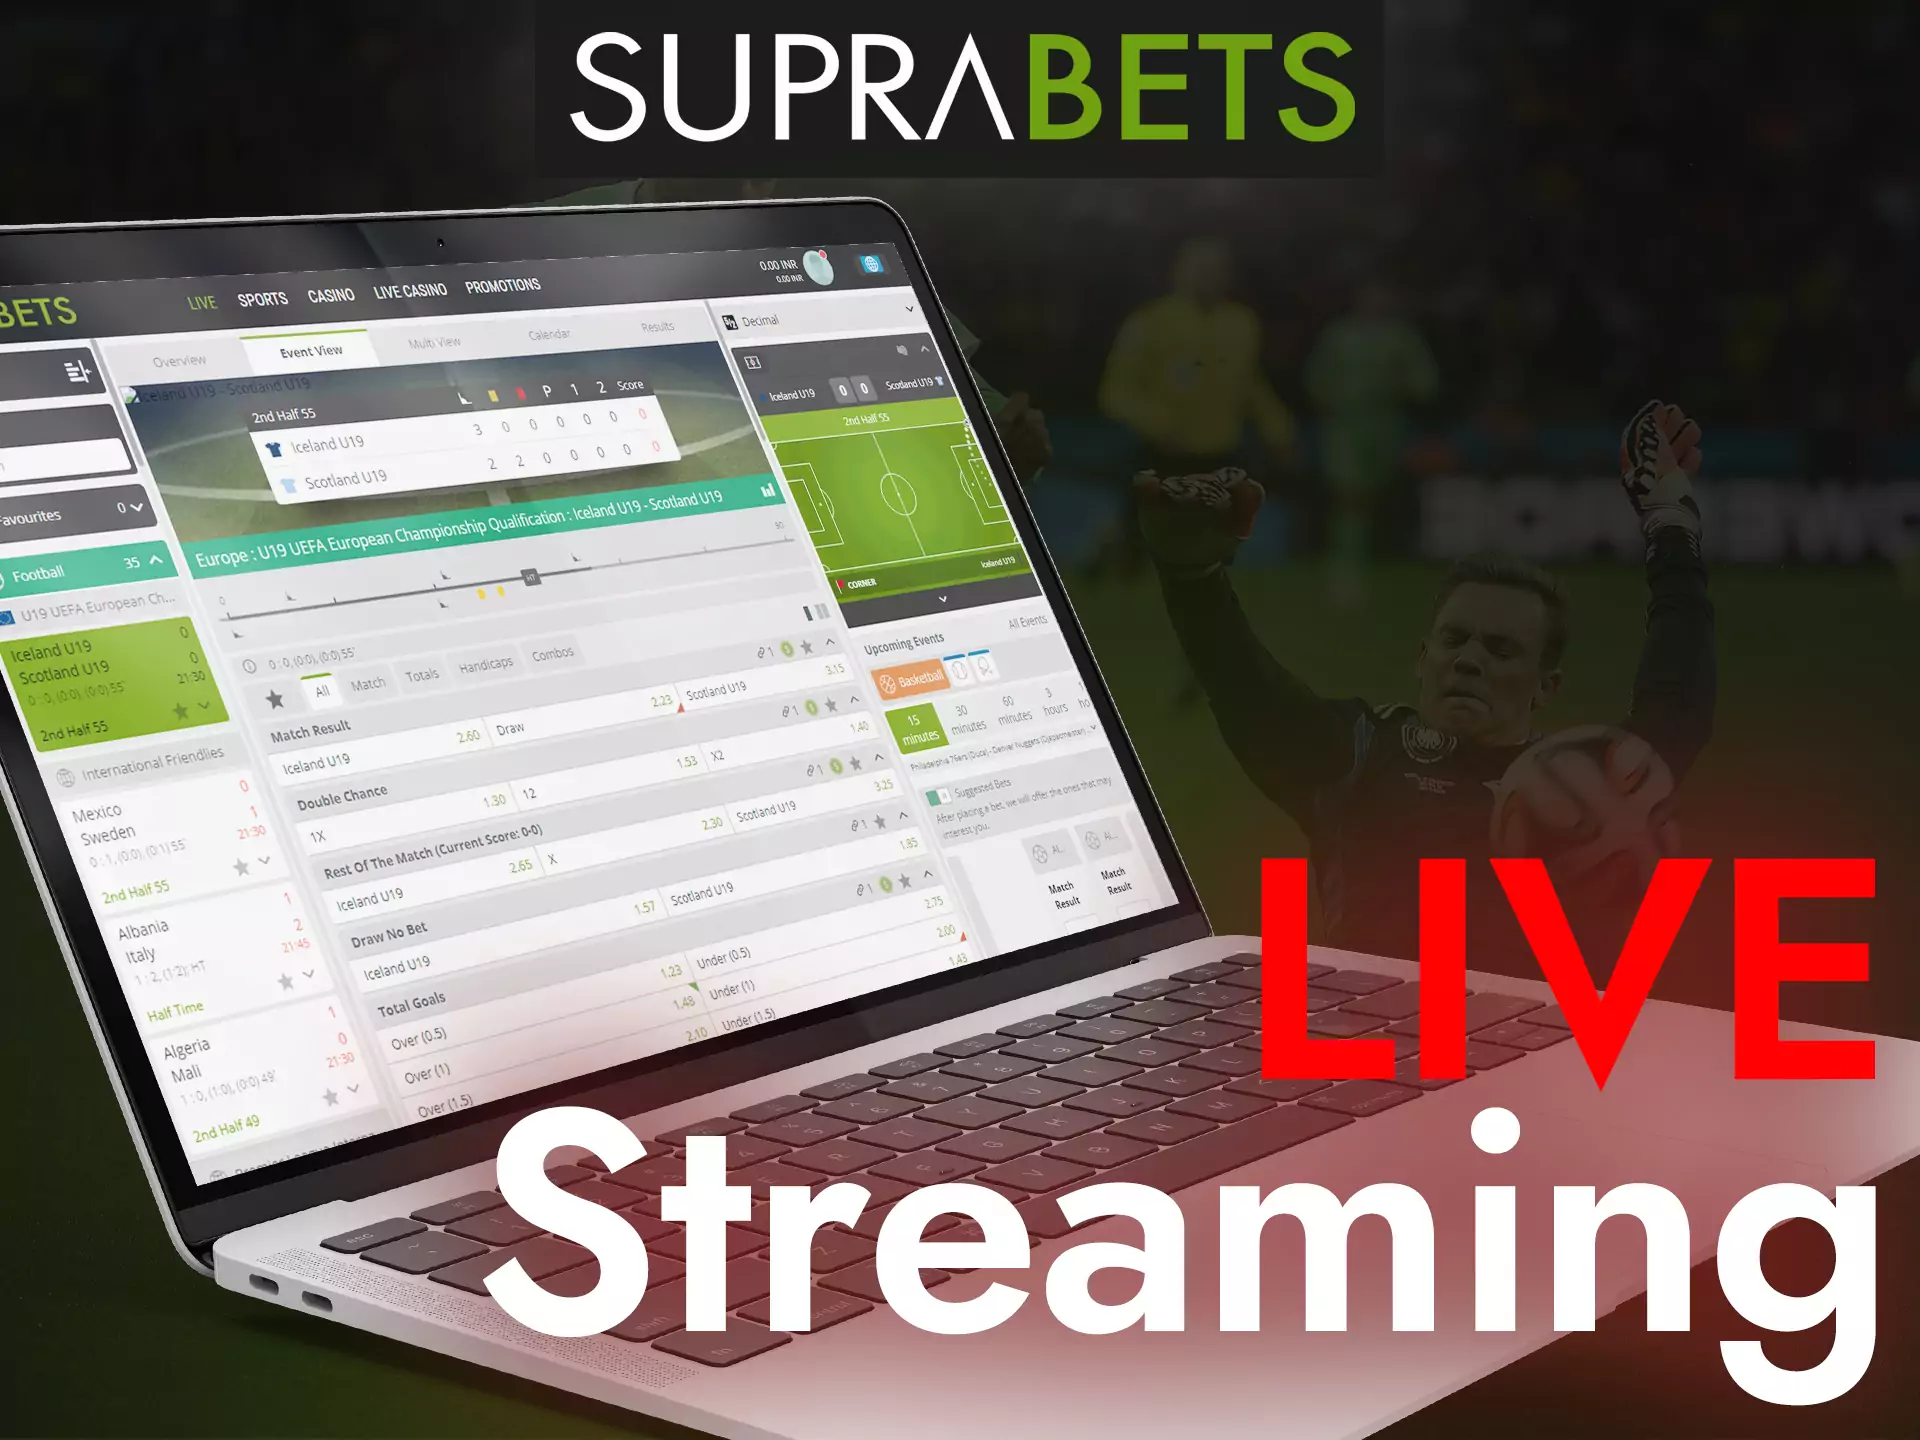 With Suprabets, follow the game of your favorite team with live streaming.